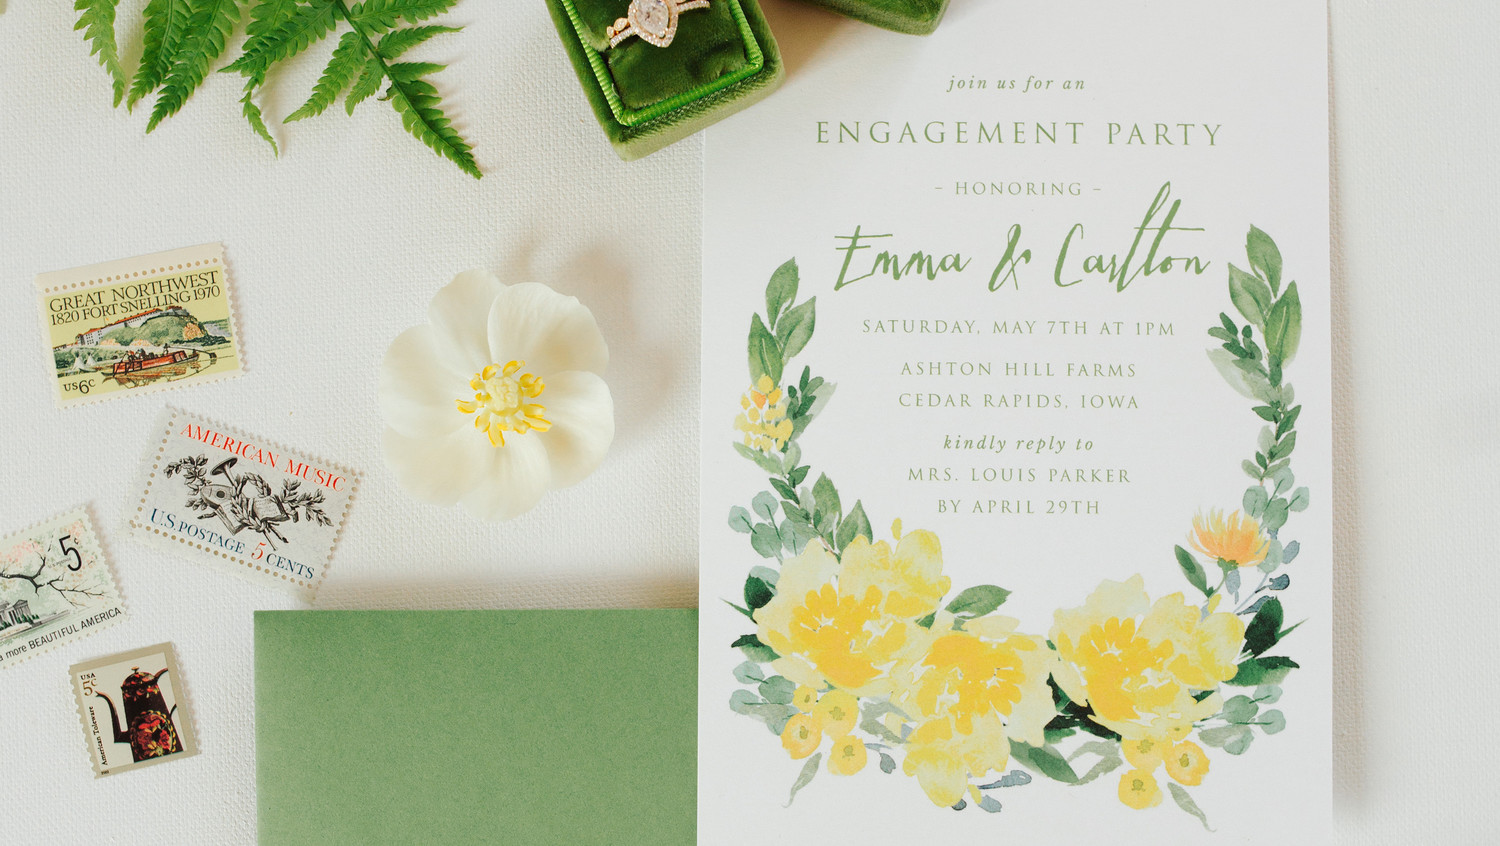 Engagement Party Ideas Martha Stewart
 An Etiquette Expert on the Engagement Party Rules You Need